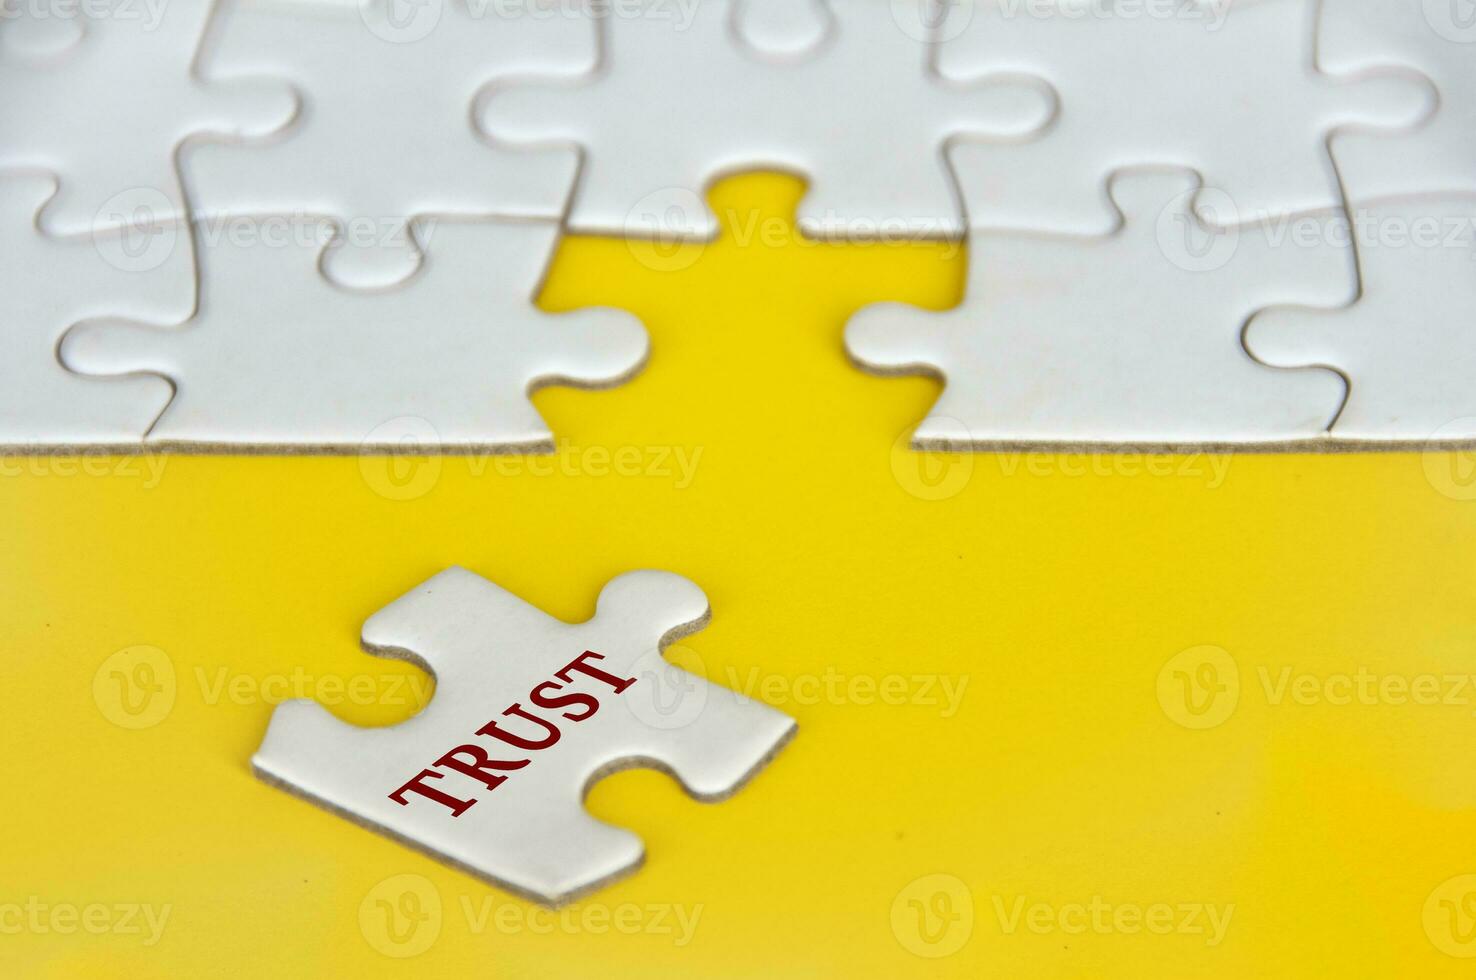 Trust text on missing jigsaw puzzle on yellow background photo